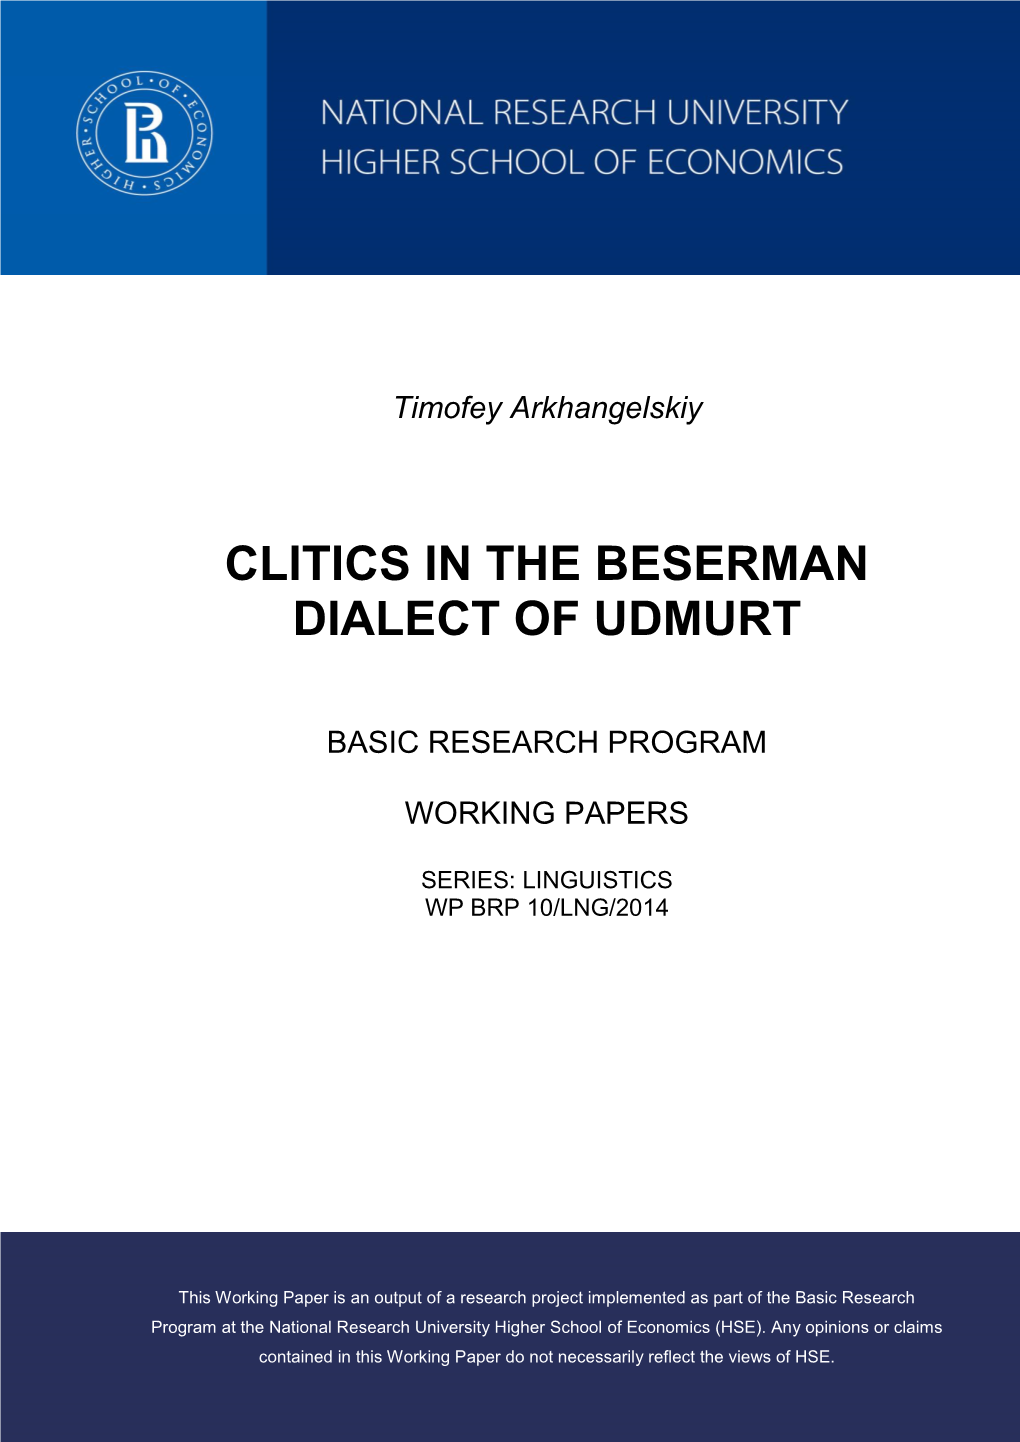 Clitics in the Beserman Dialect of Udmurt